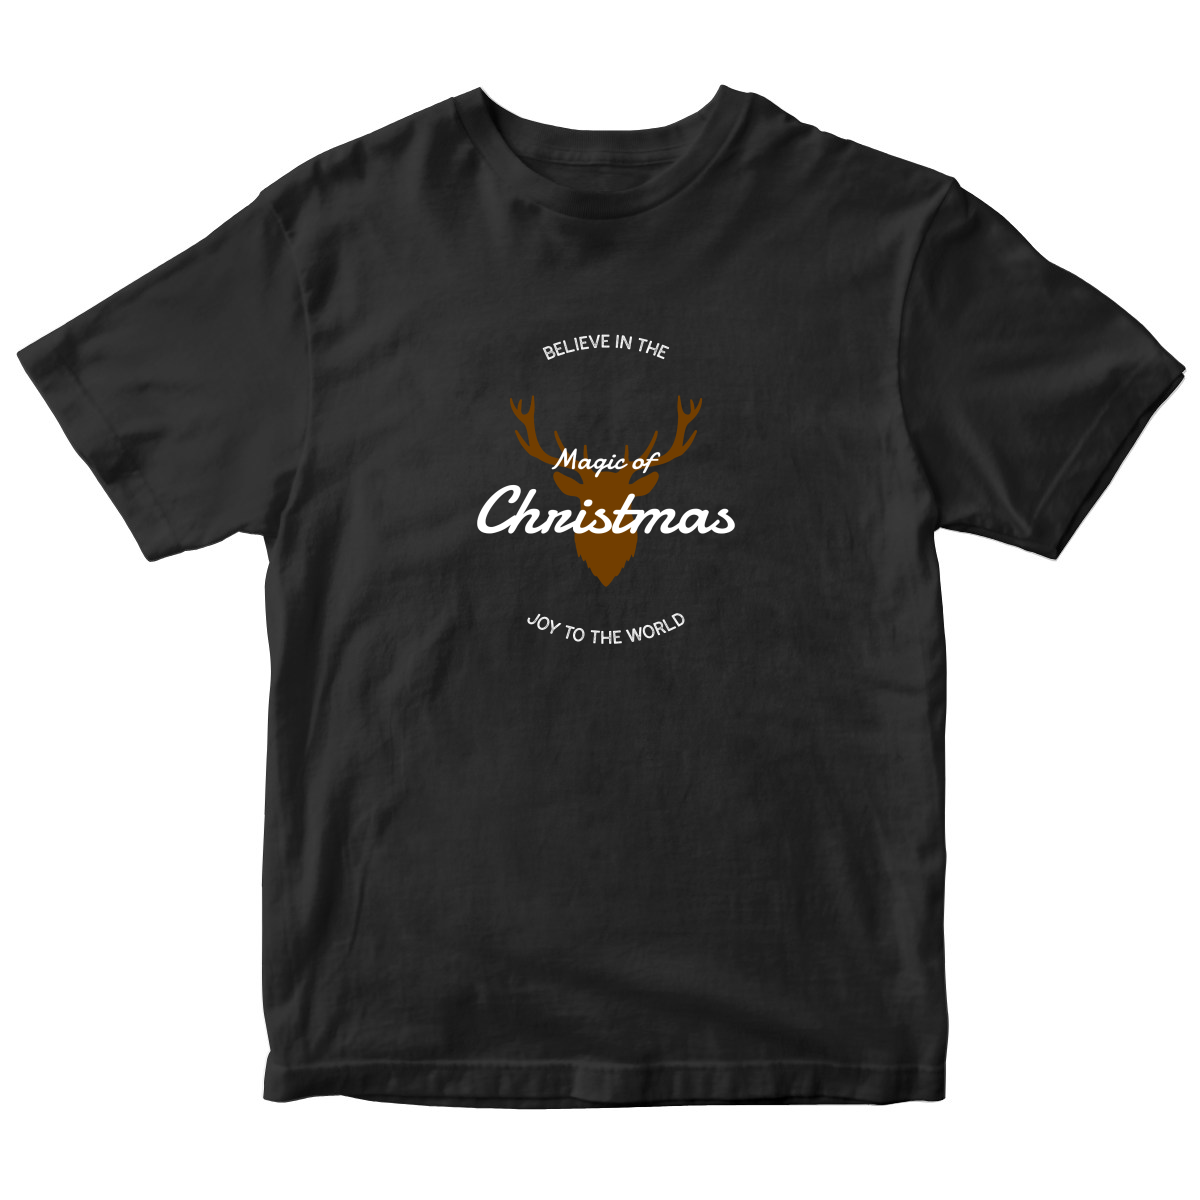 Believe in the Magic of Christmas Joy to the World Kids T-shirt | Black